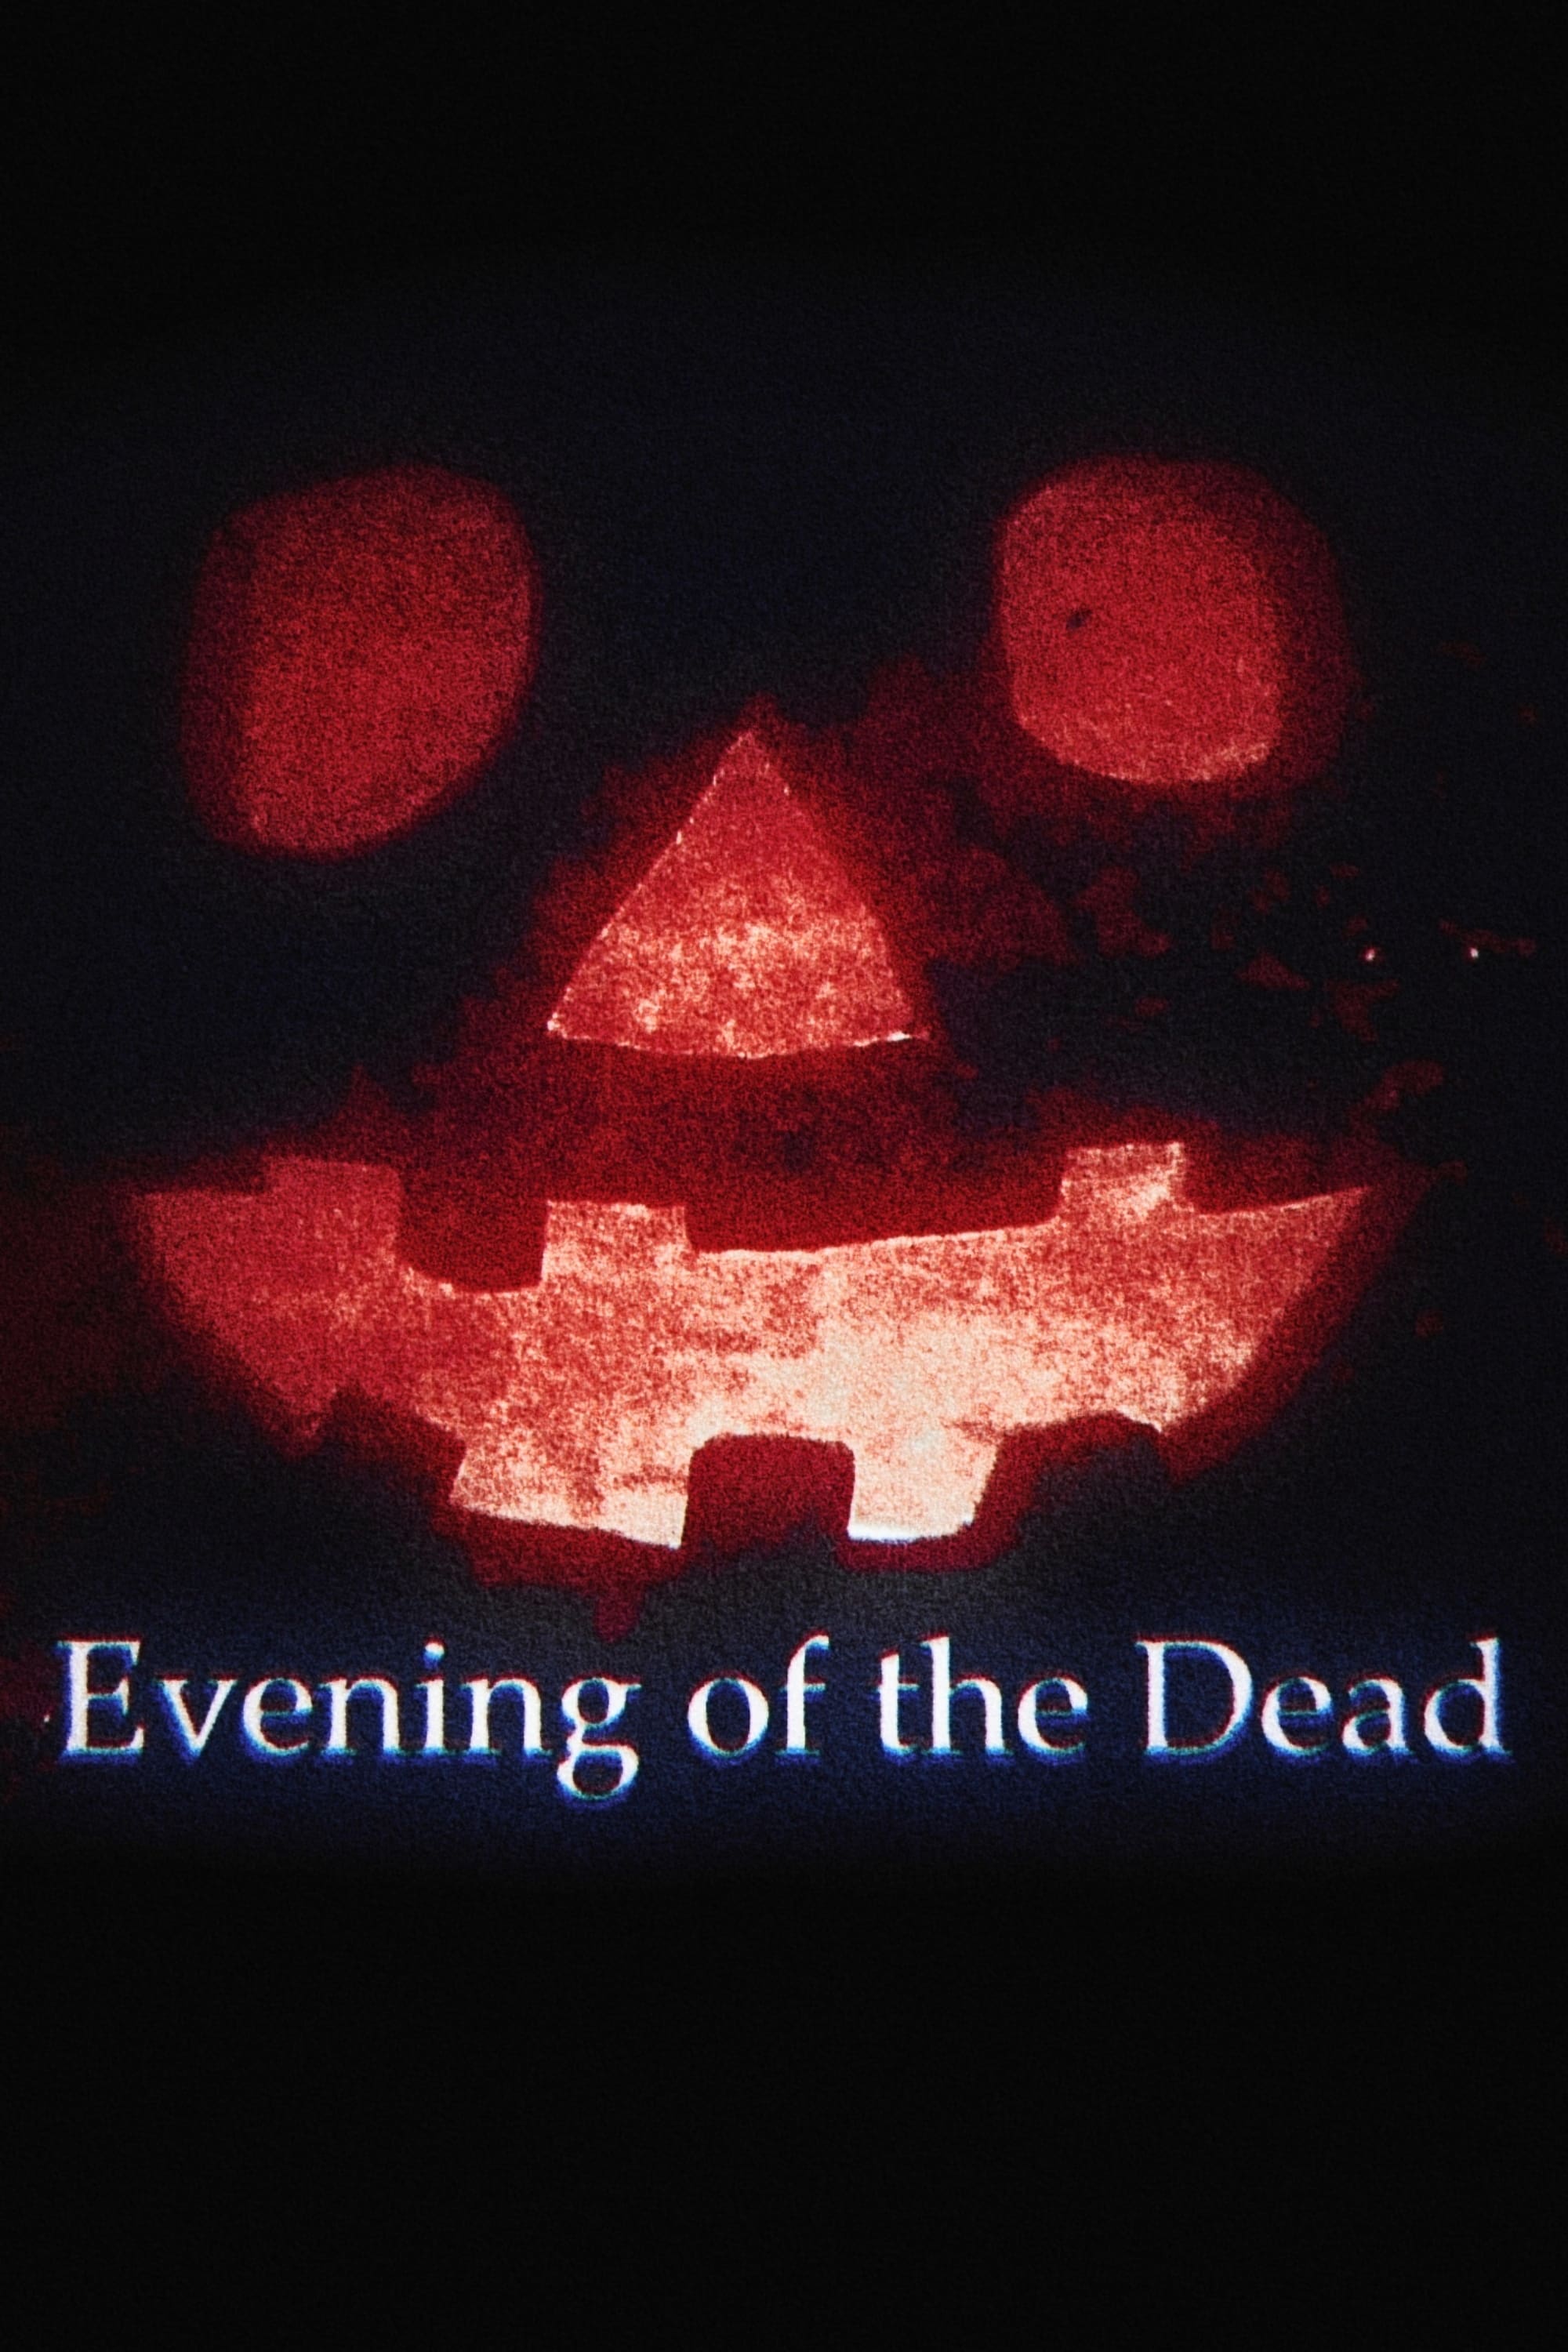 Evening of the Dead